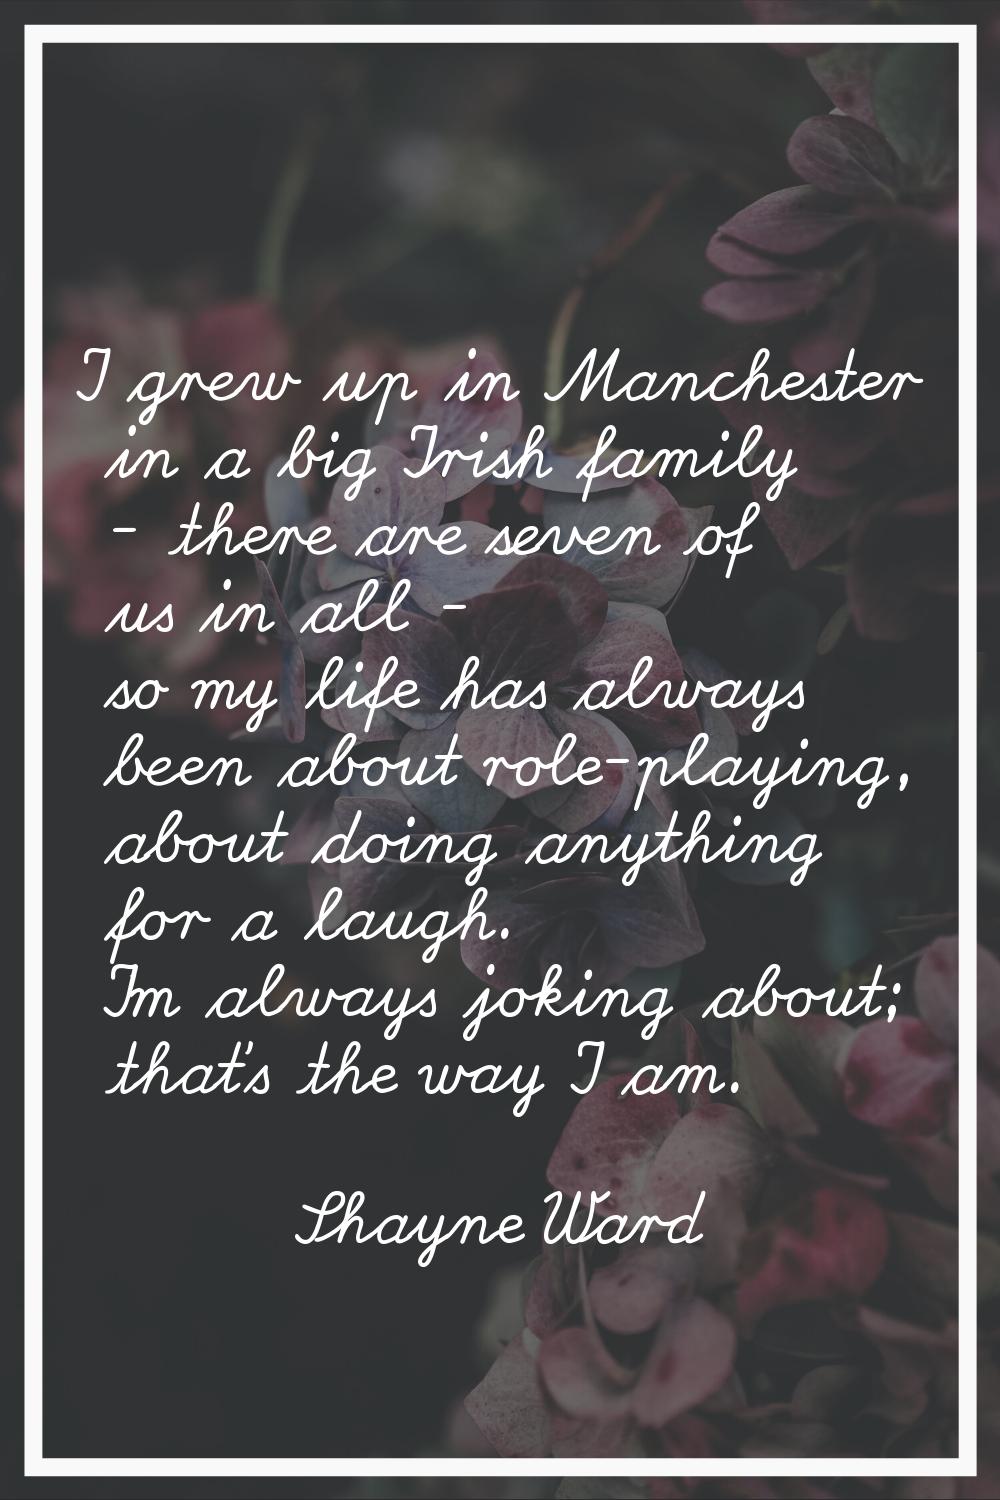 I grew up in Manchester in a big Irish family - there are seven of us in all - so my life has alway